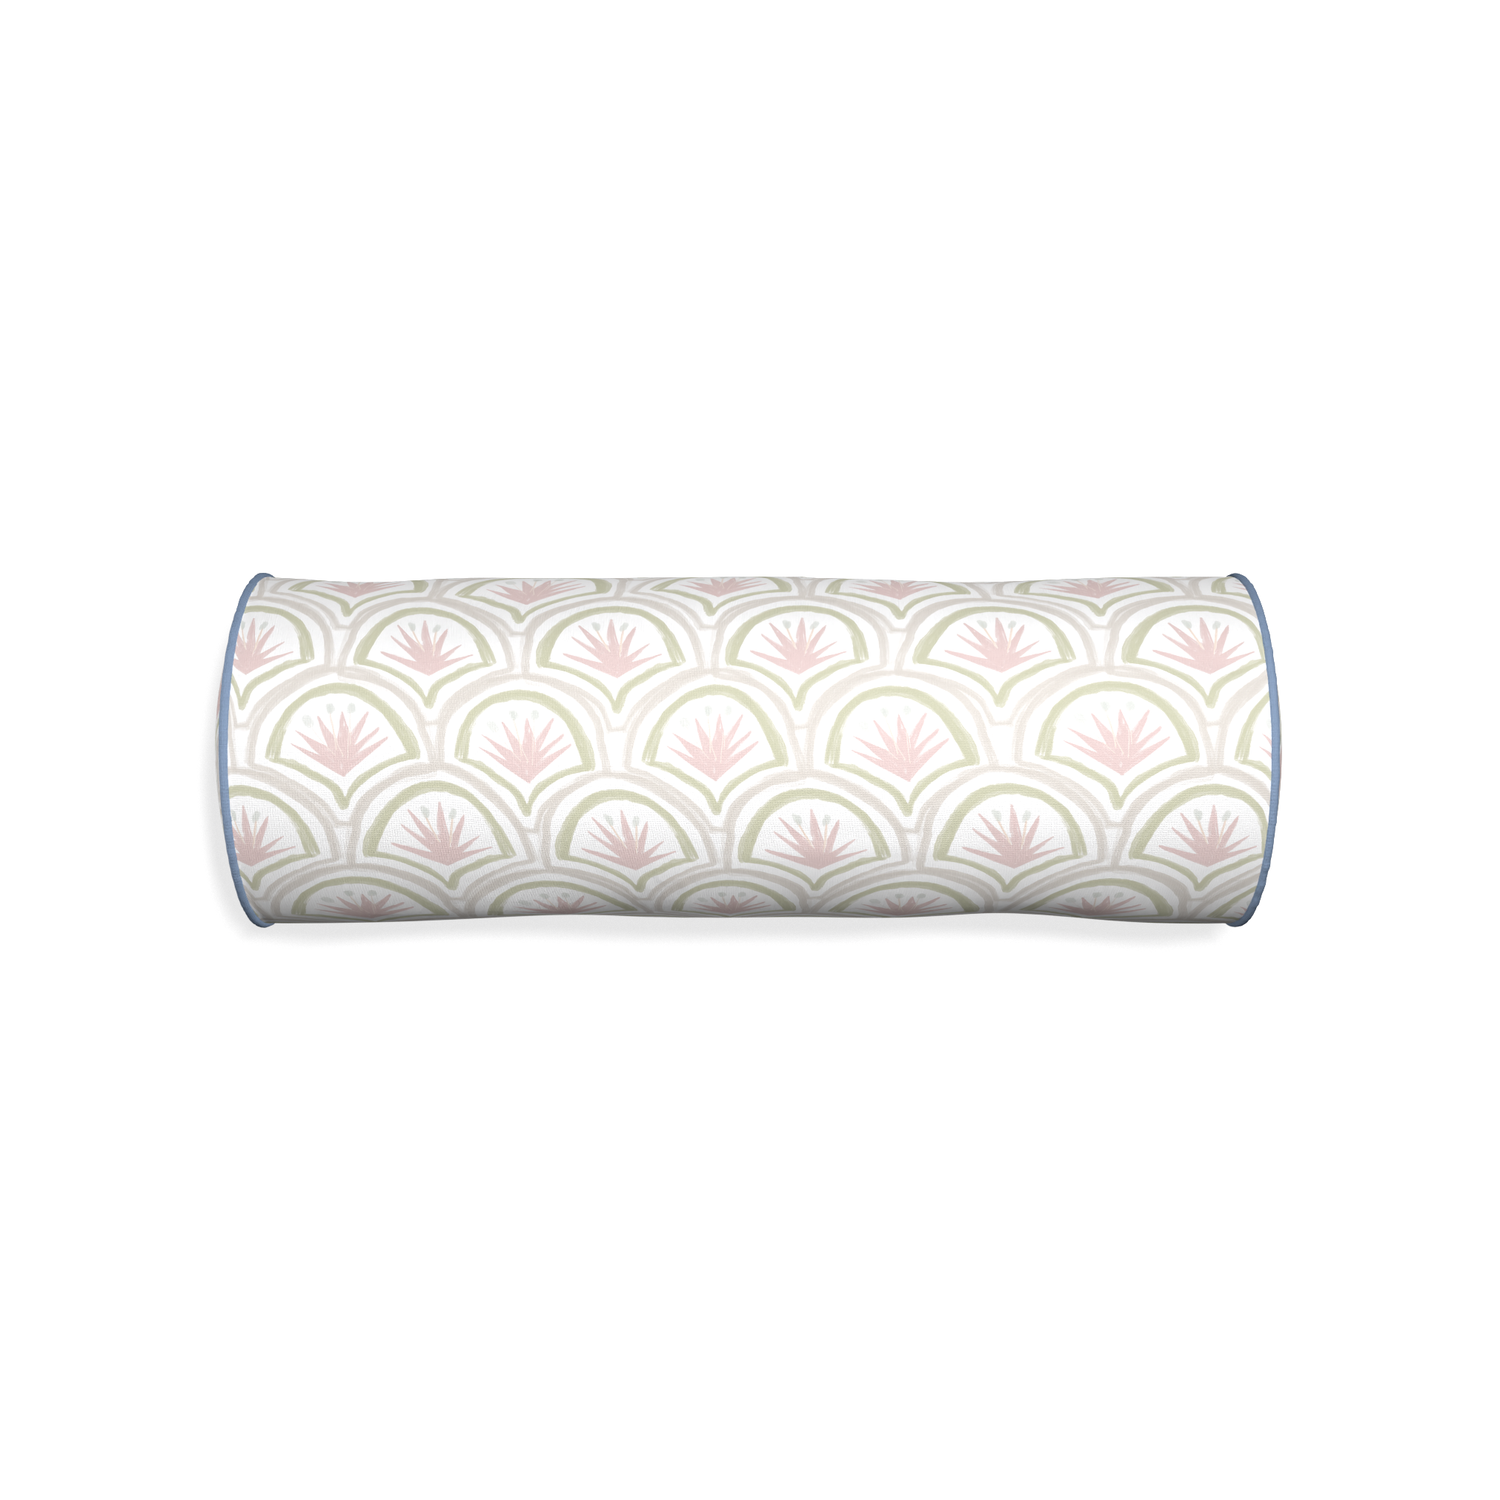 Bolster thatcher rose custom pillow with sky piping on white background